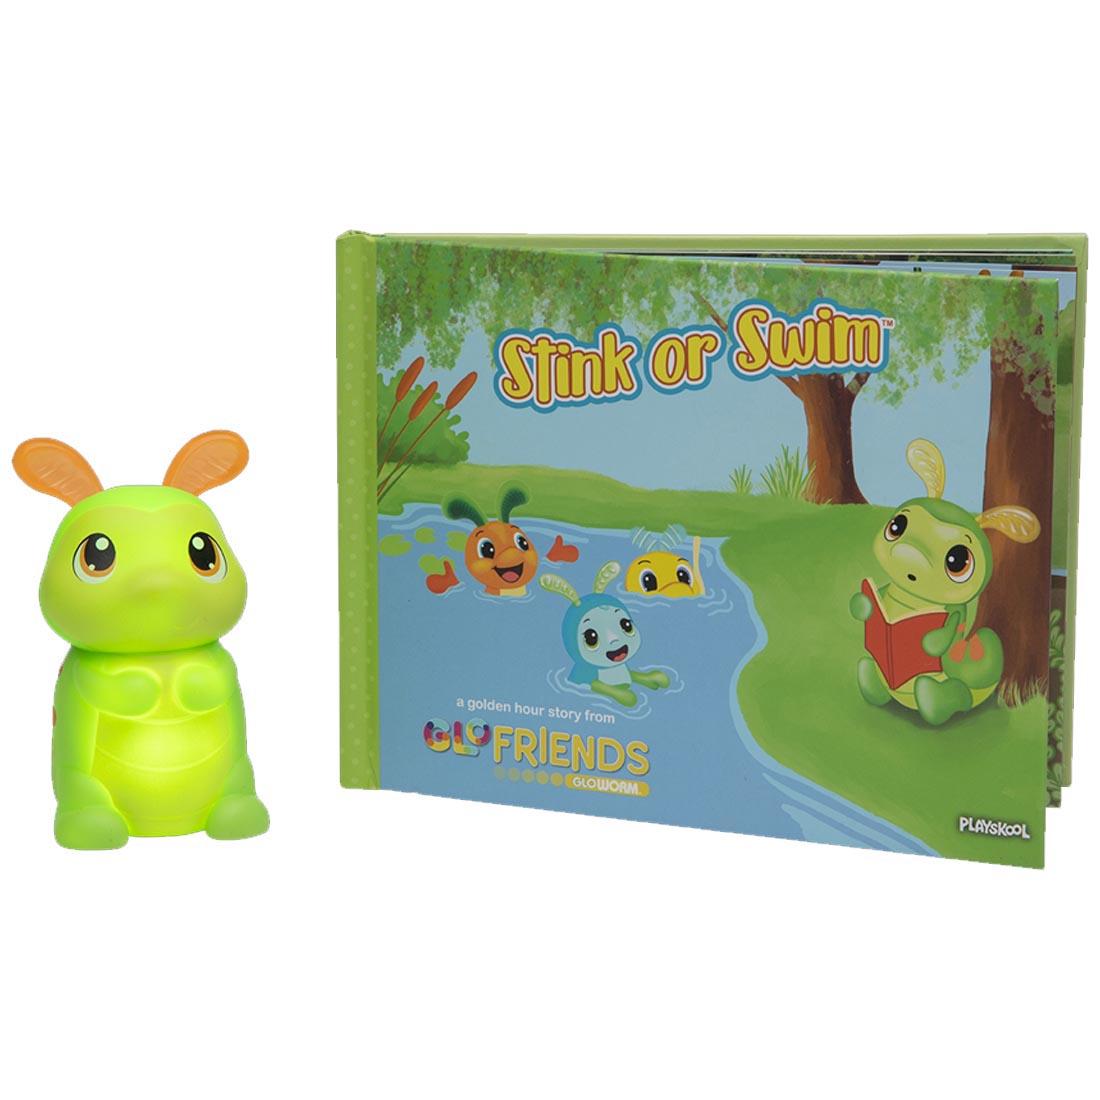 front cover of the Stink Or Swim book beside the Bookworm toy